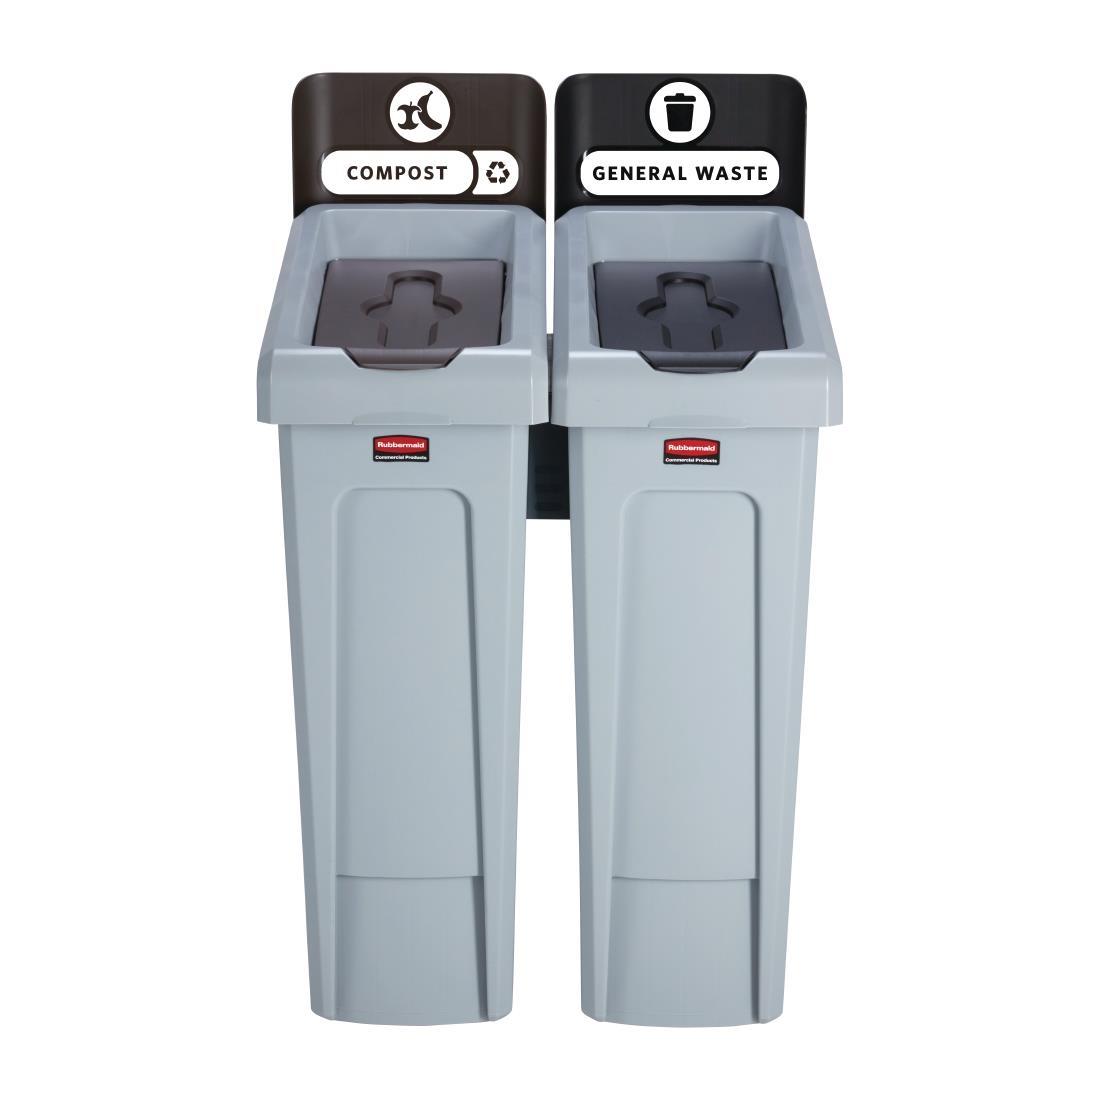 Rubbermaid Slim Jim Two Stream Recycling Station 87Ltr - DY079  - 2